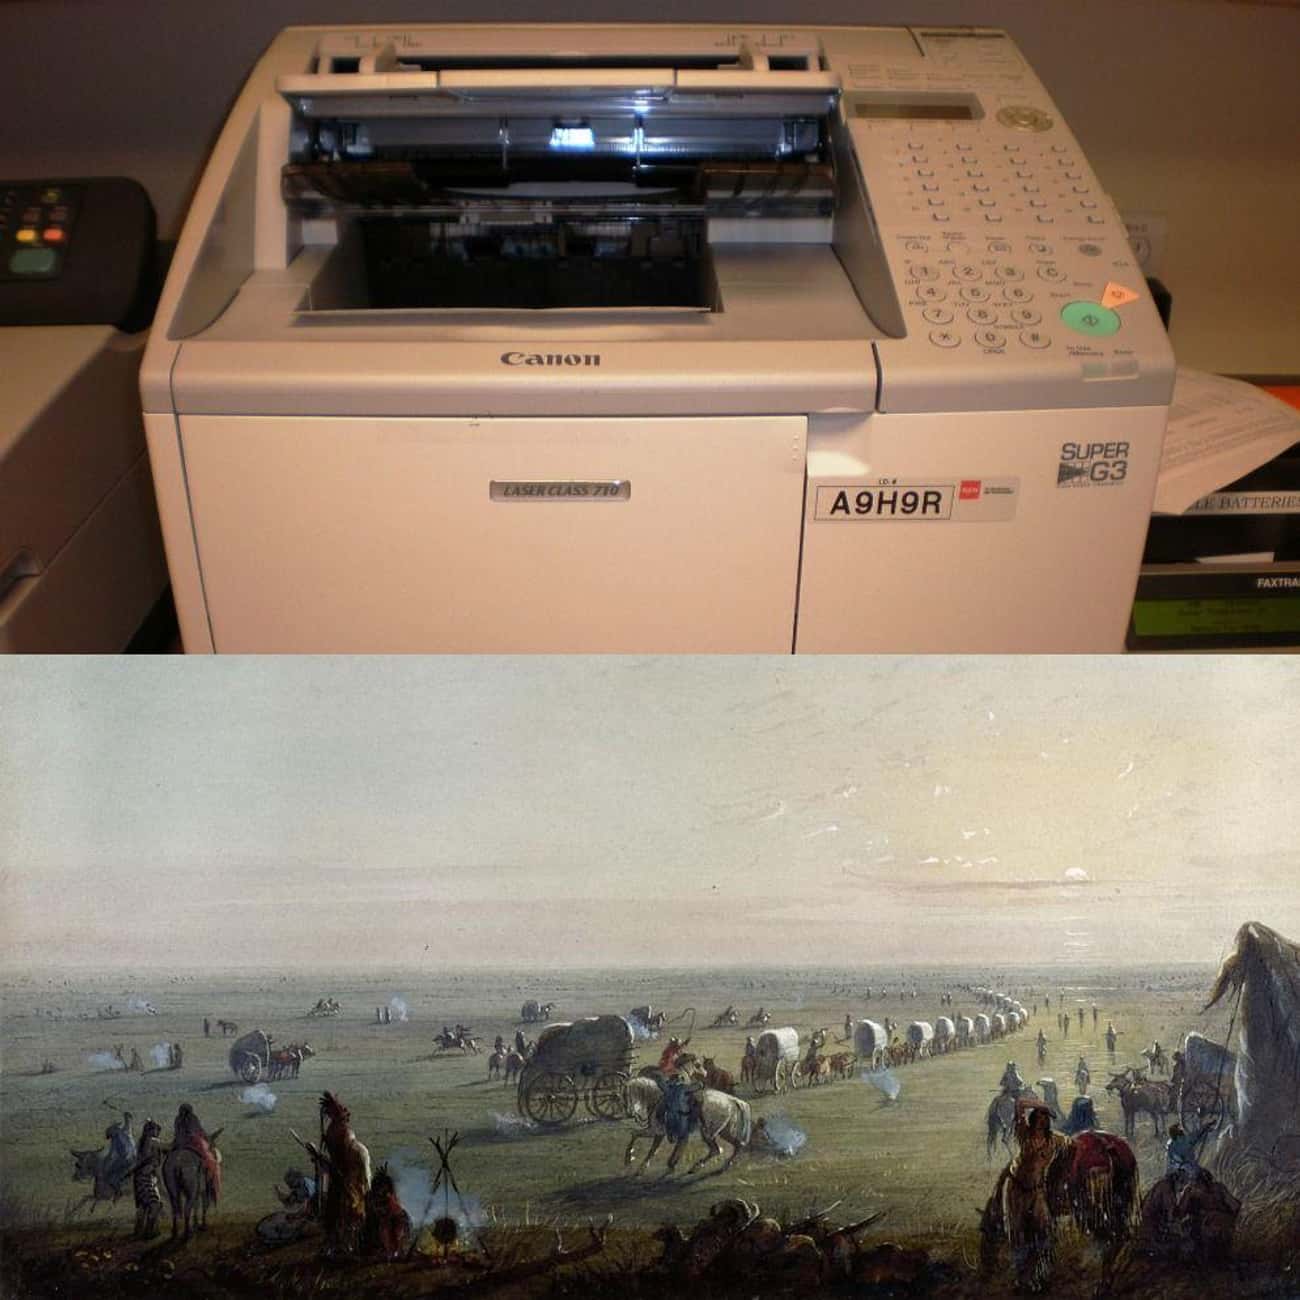 The Fax Machine Was Invented The Same Year The First Wagon Crossed the Oregon Trail (1843)